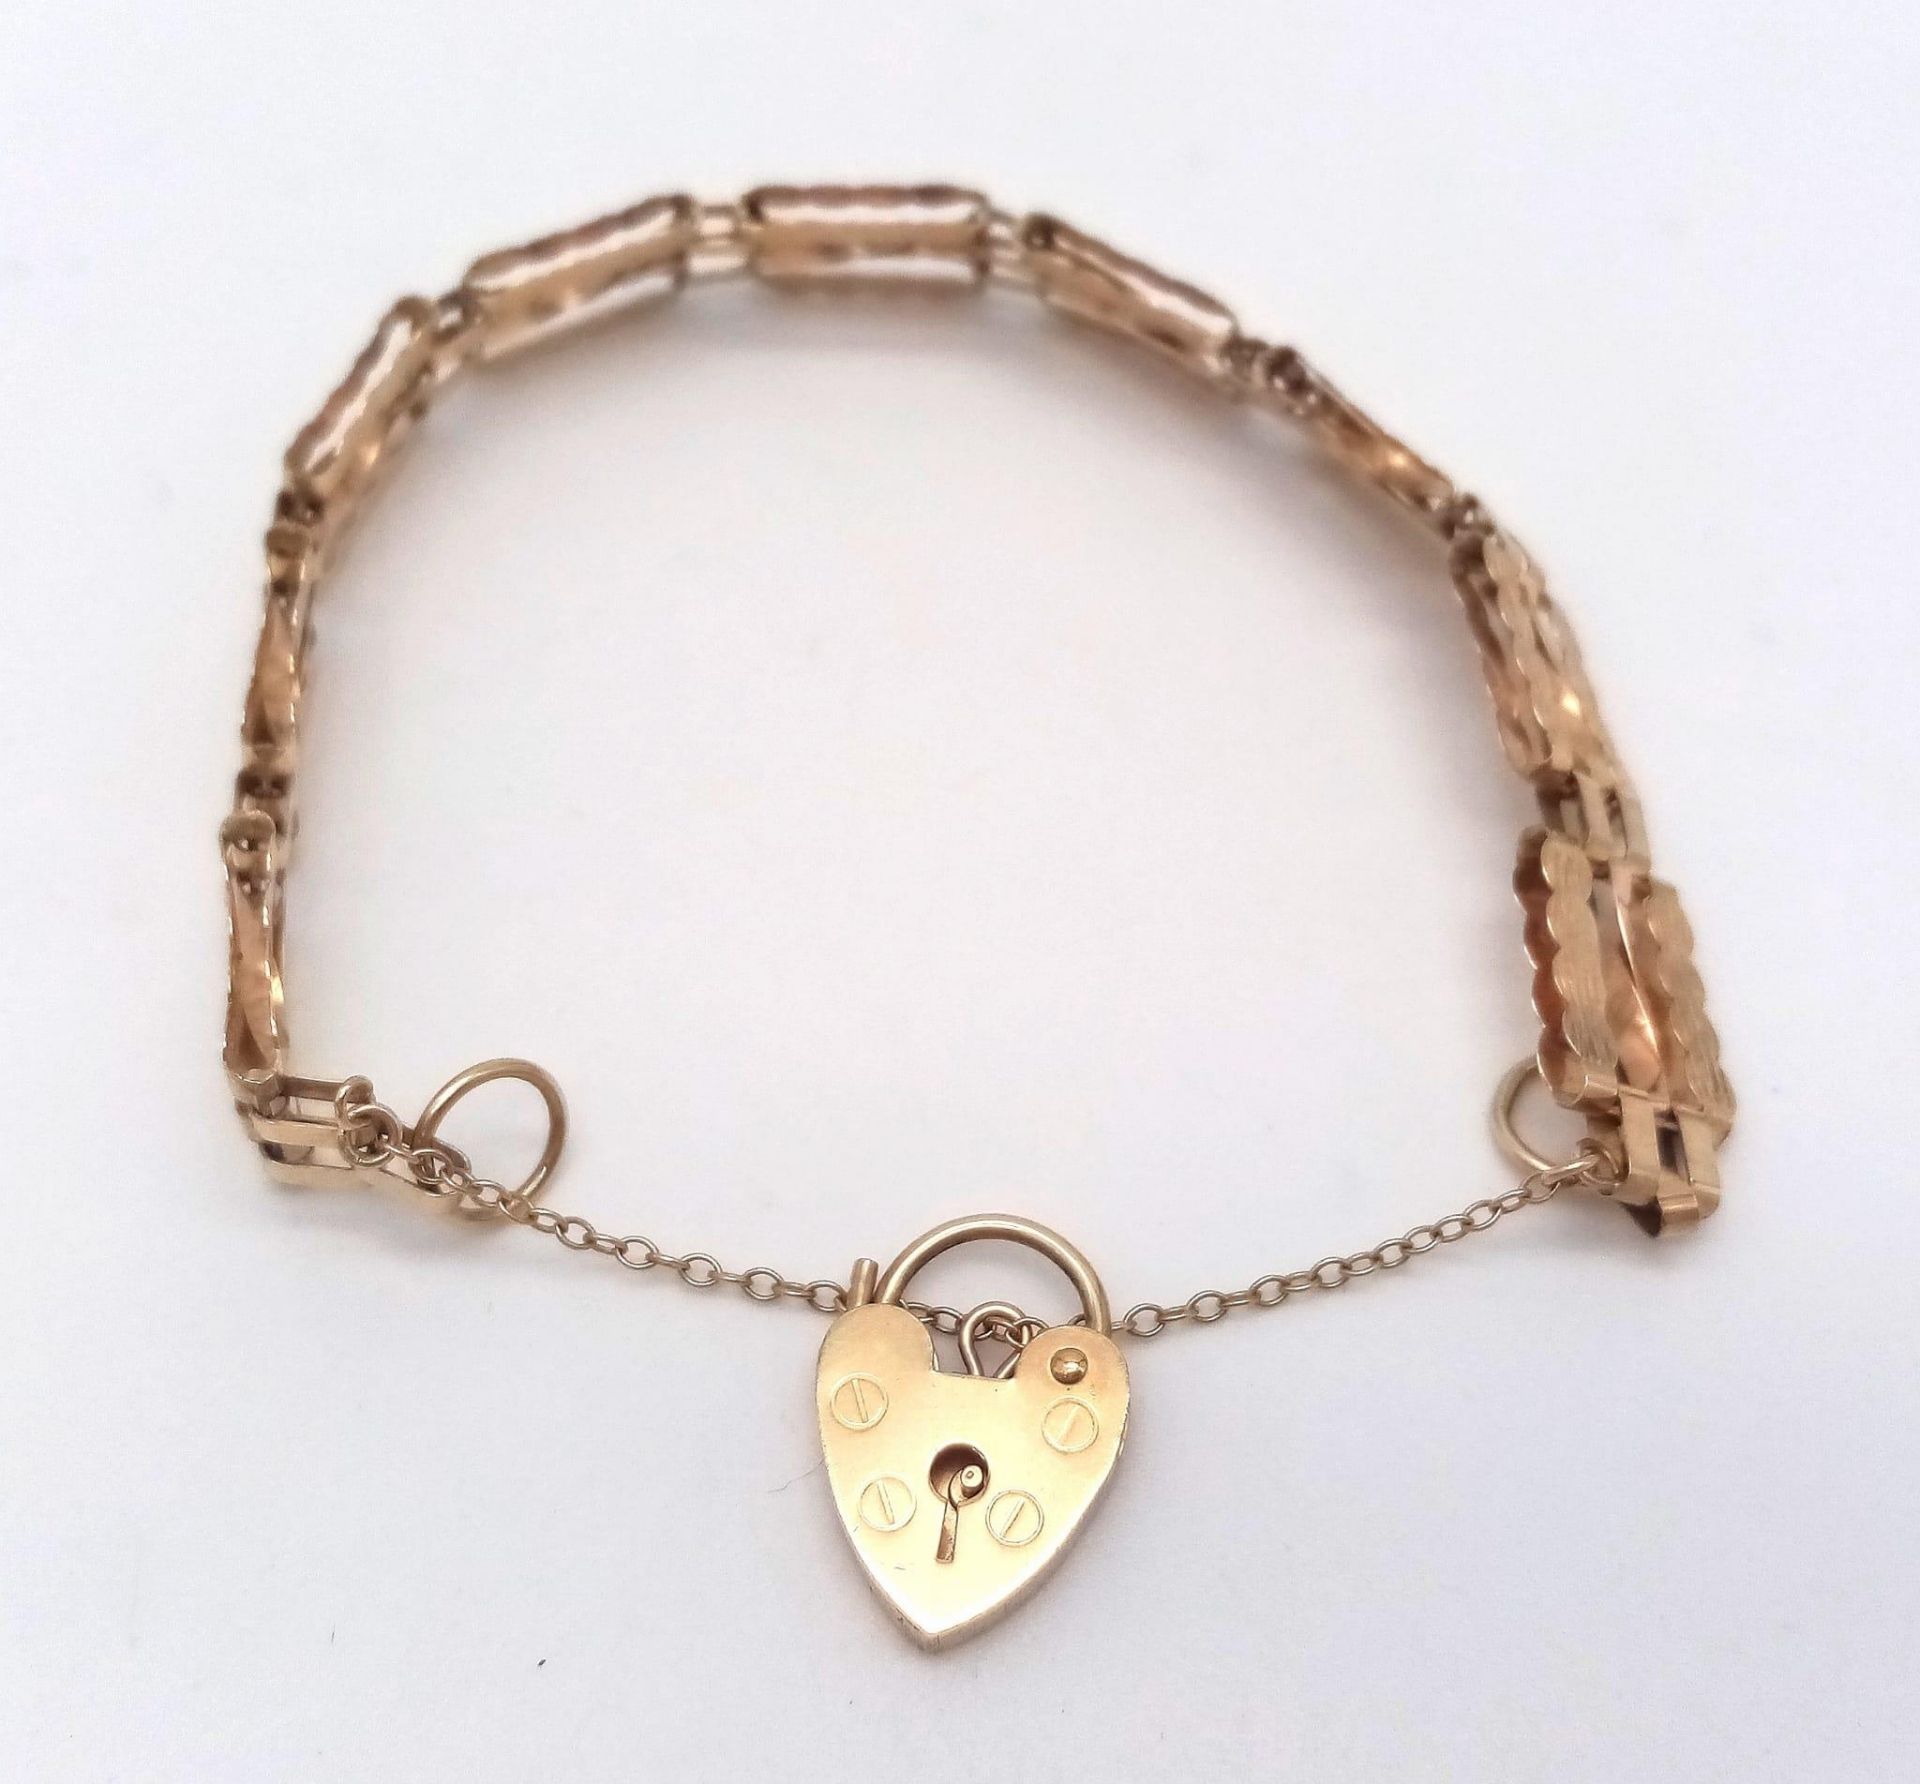 AN ANTIQUE 9K GOLD NICELY PATTERNED GATE BRACELET WITH HEART PADLOCK AND SAFETY CHAIN . 8.1gms - Image 4 of 9